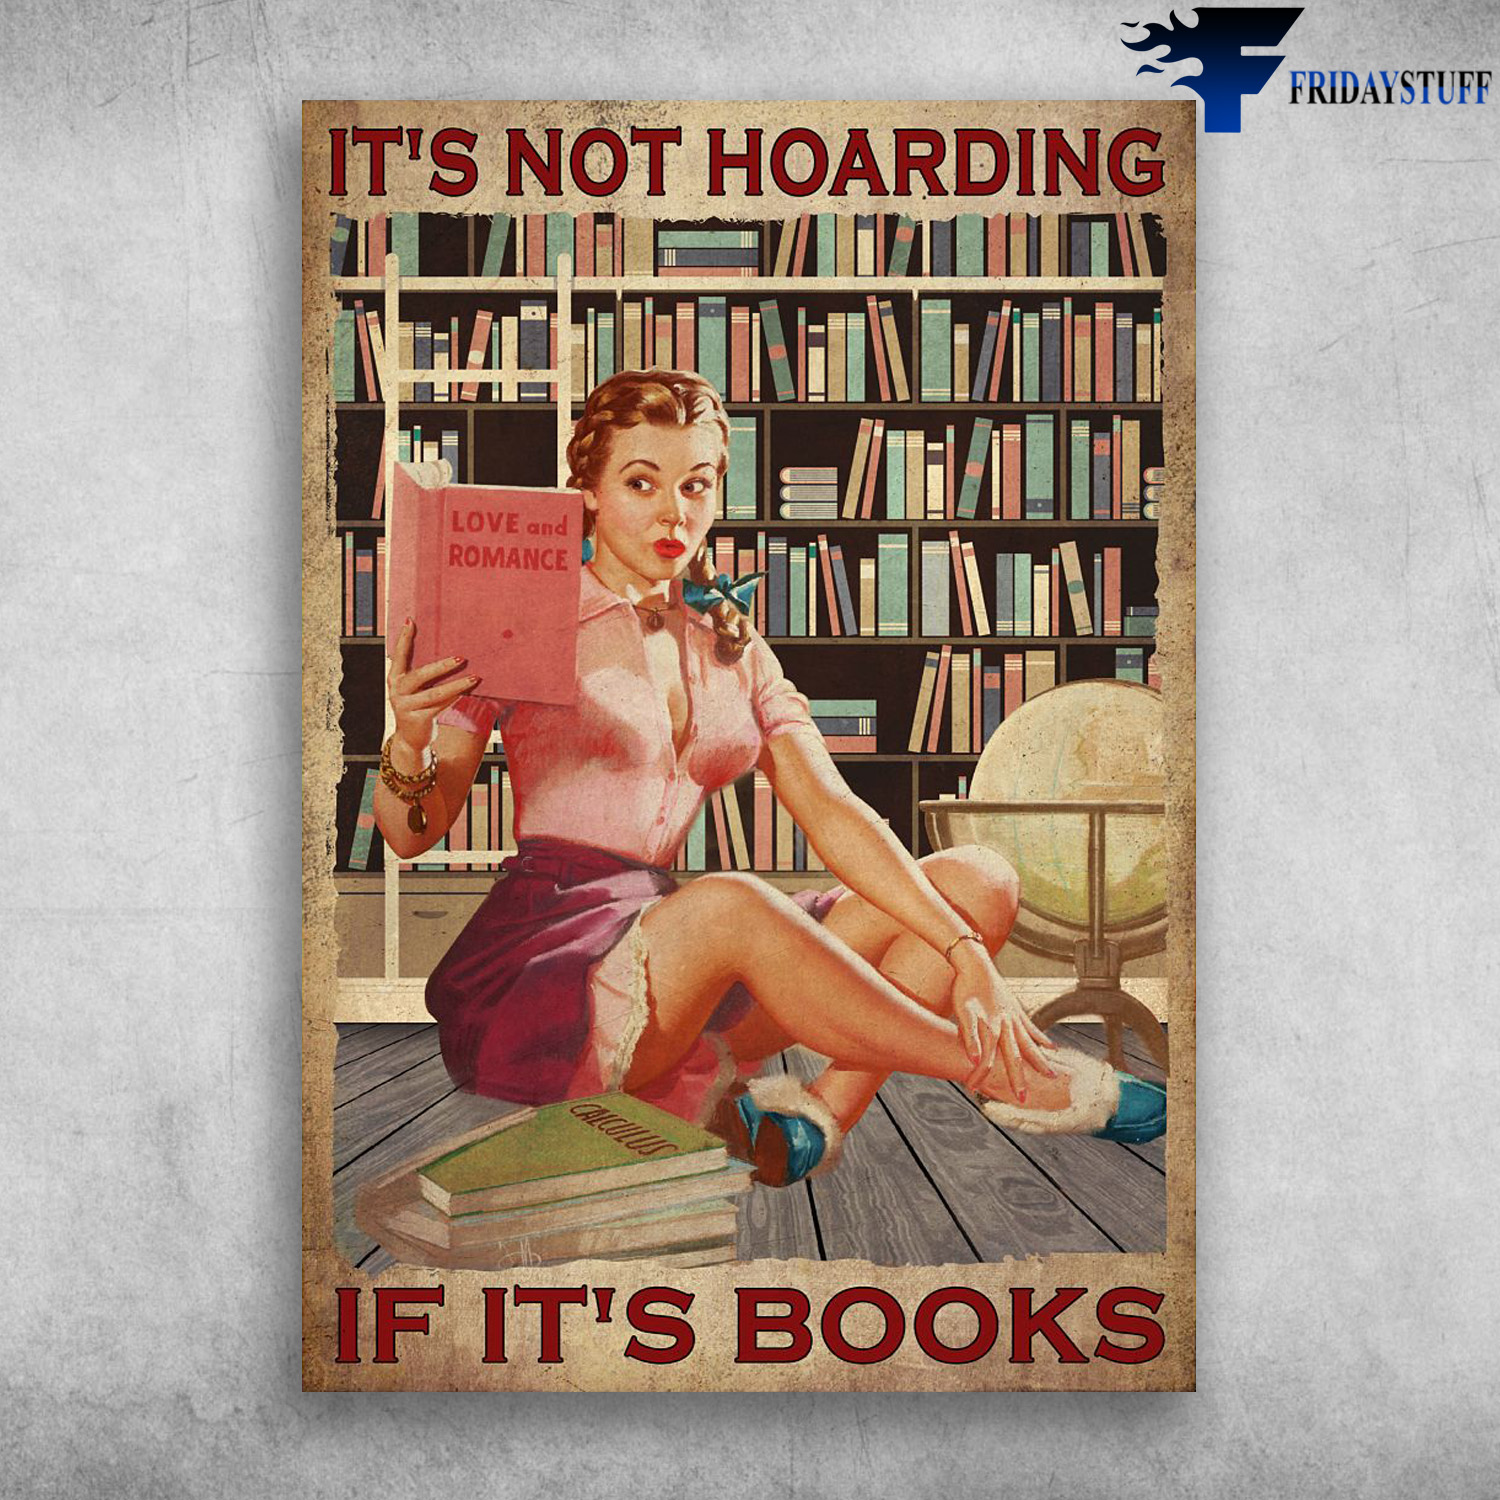 Girl Loves Book, Love And Romance - It's Not Hoarding, If It's Books